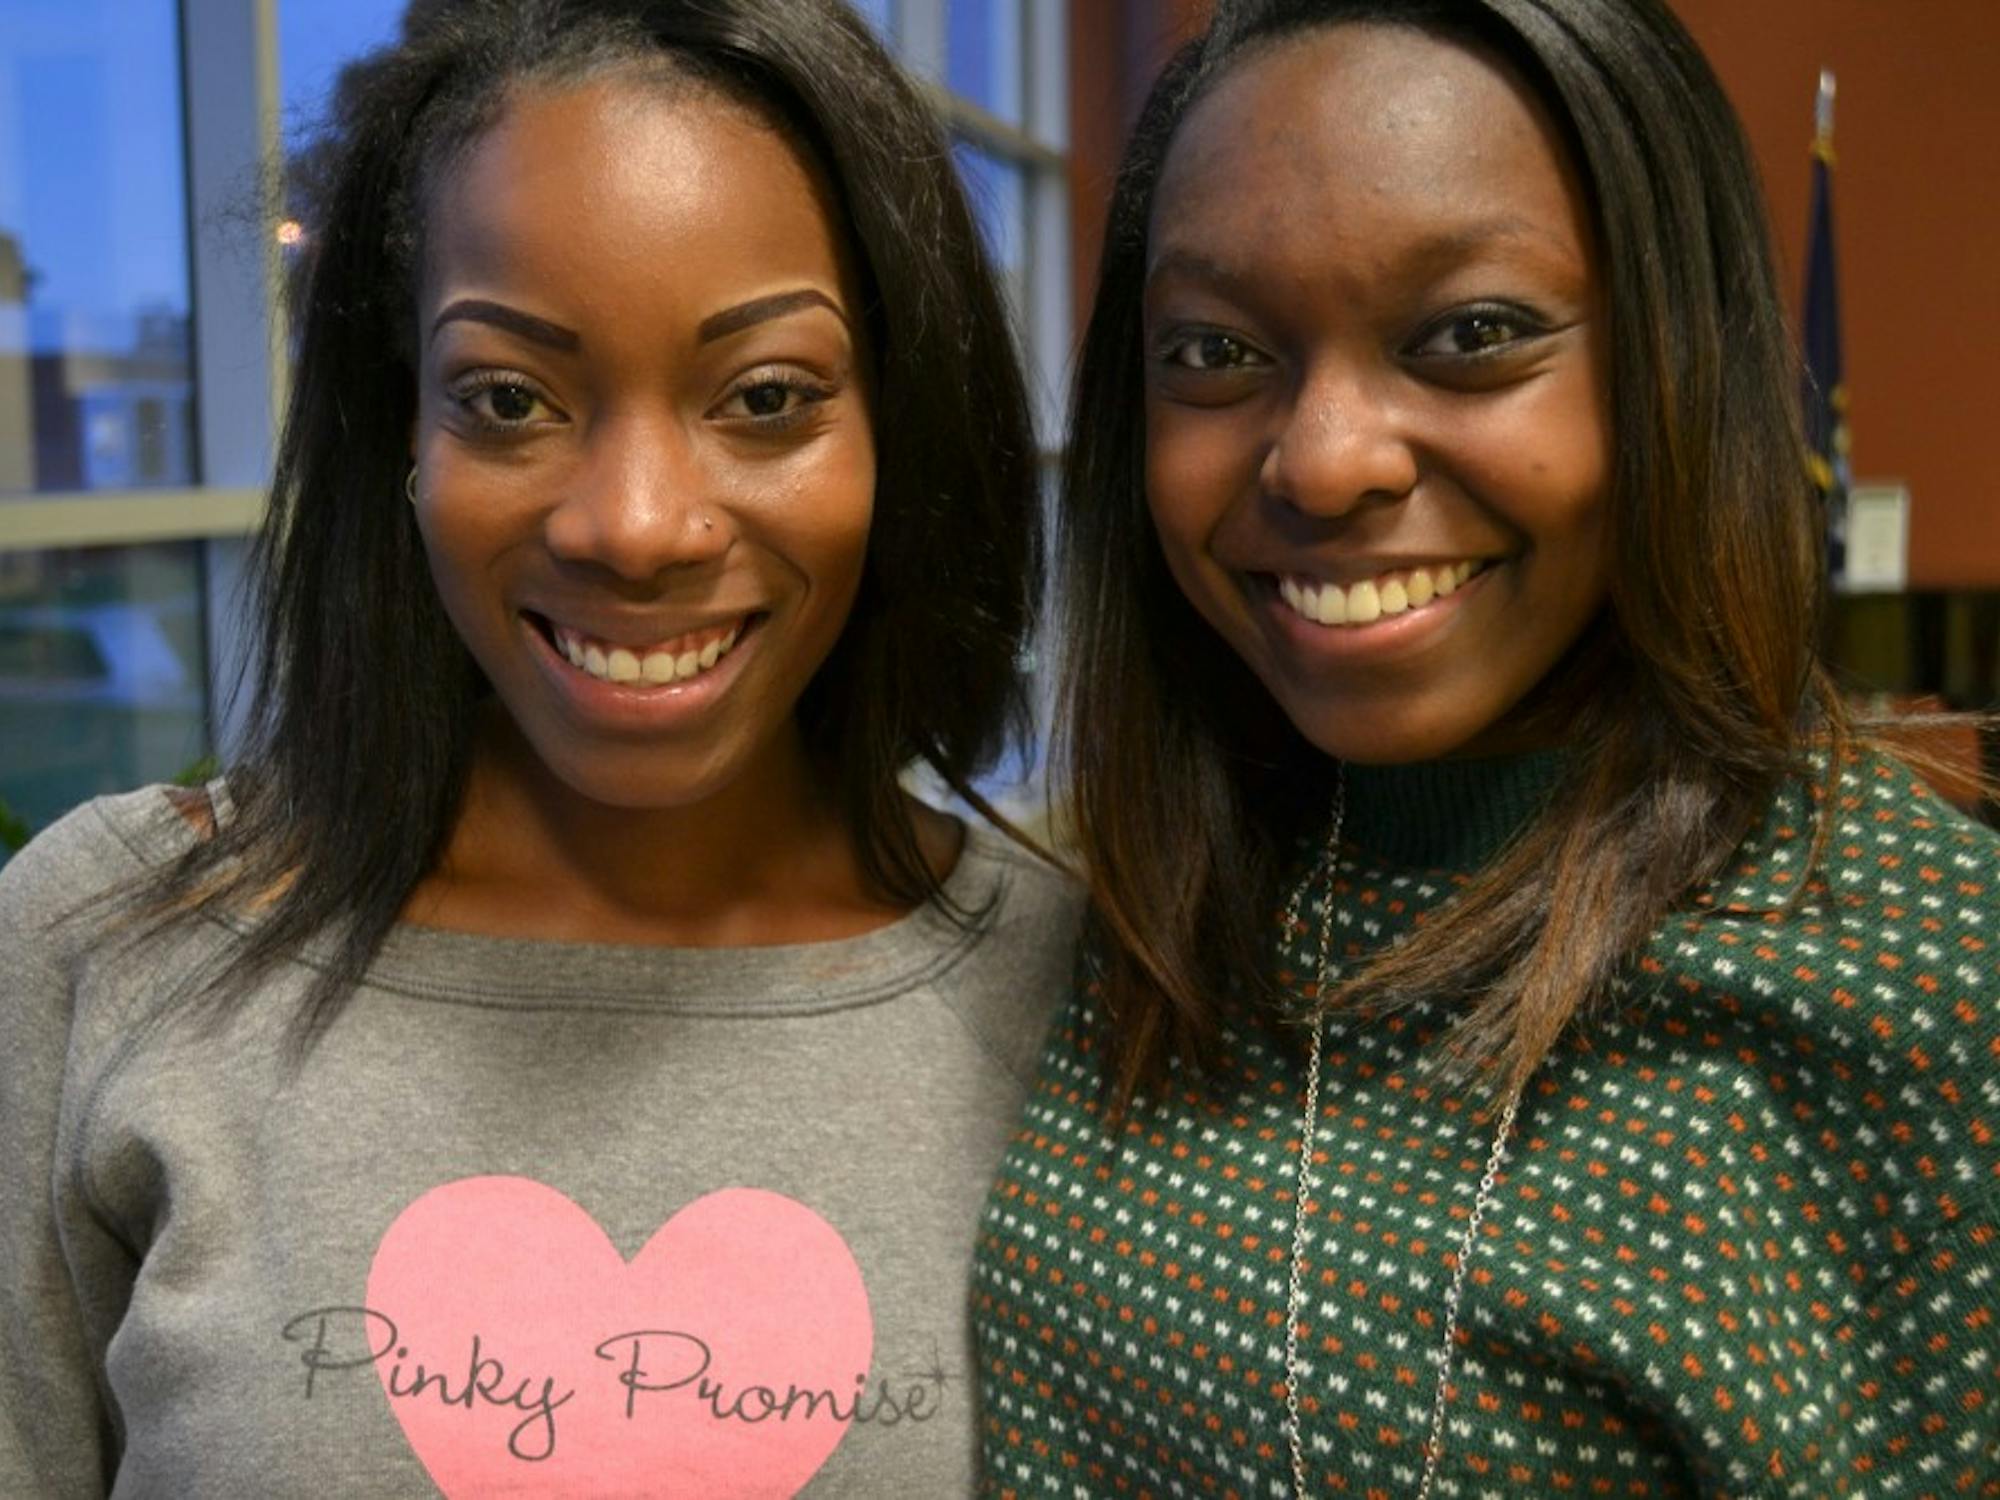 	Pinky Promise has officially arrived at Eastern Michigan University with high hopes from Misha Byrd, president and Lydia Seale, vice president. Their vision is becoming a sisterhood bonded by their experiences and the chance to become closer to God with their choice of remaining sexually inactive until marriage. 